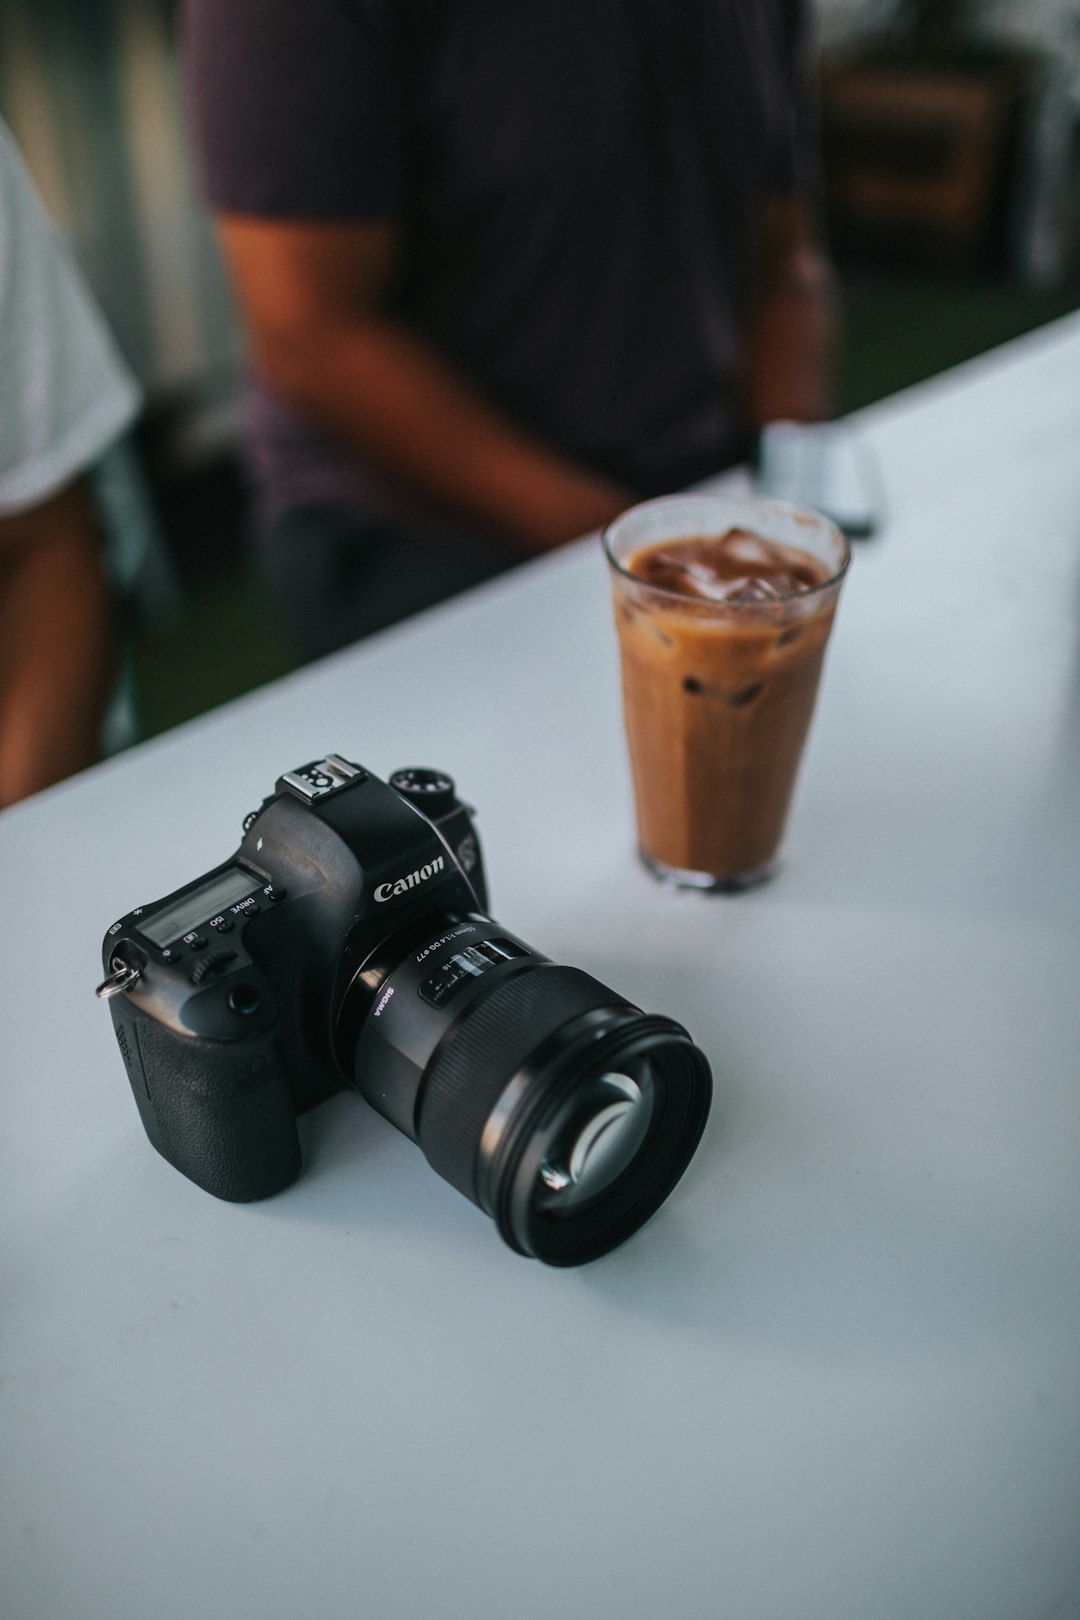 black nikon dslr camera beside brown disposable cup on white table